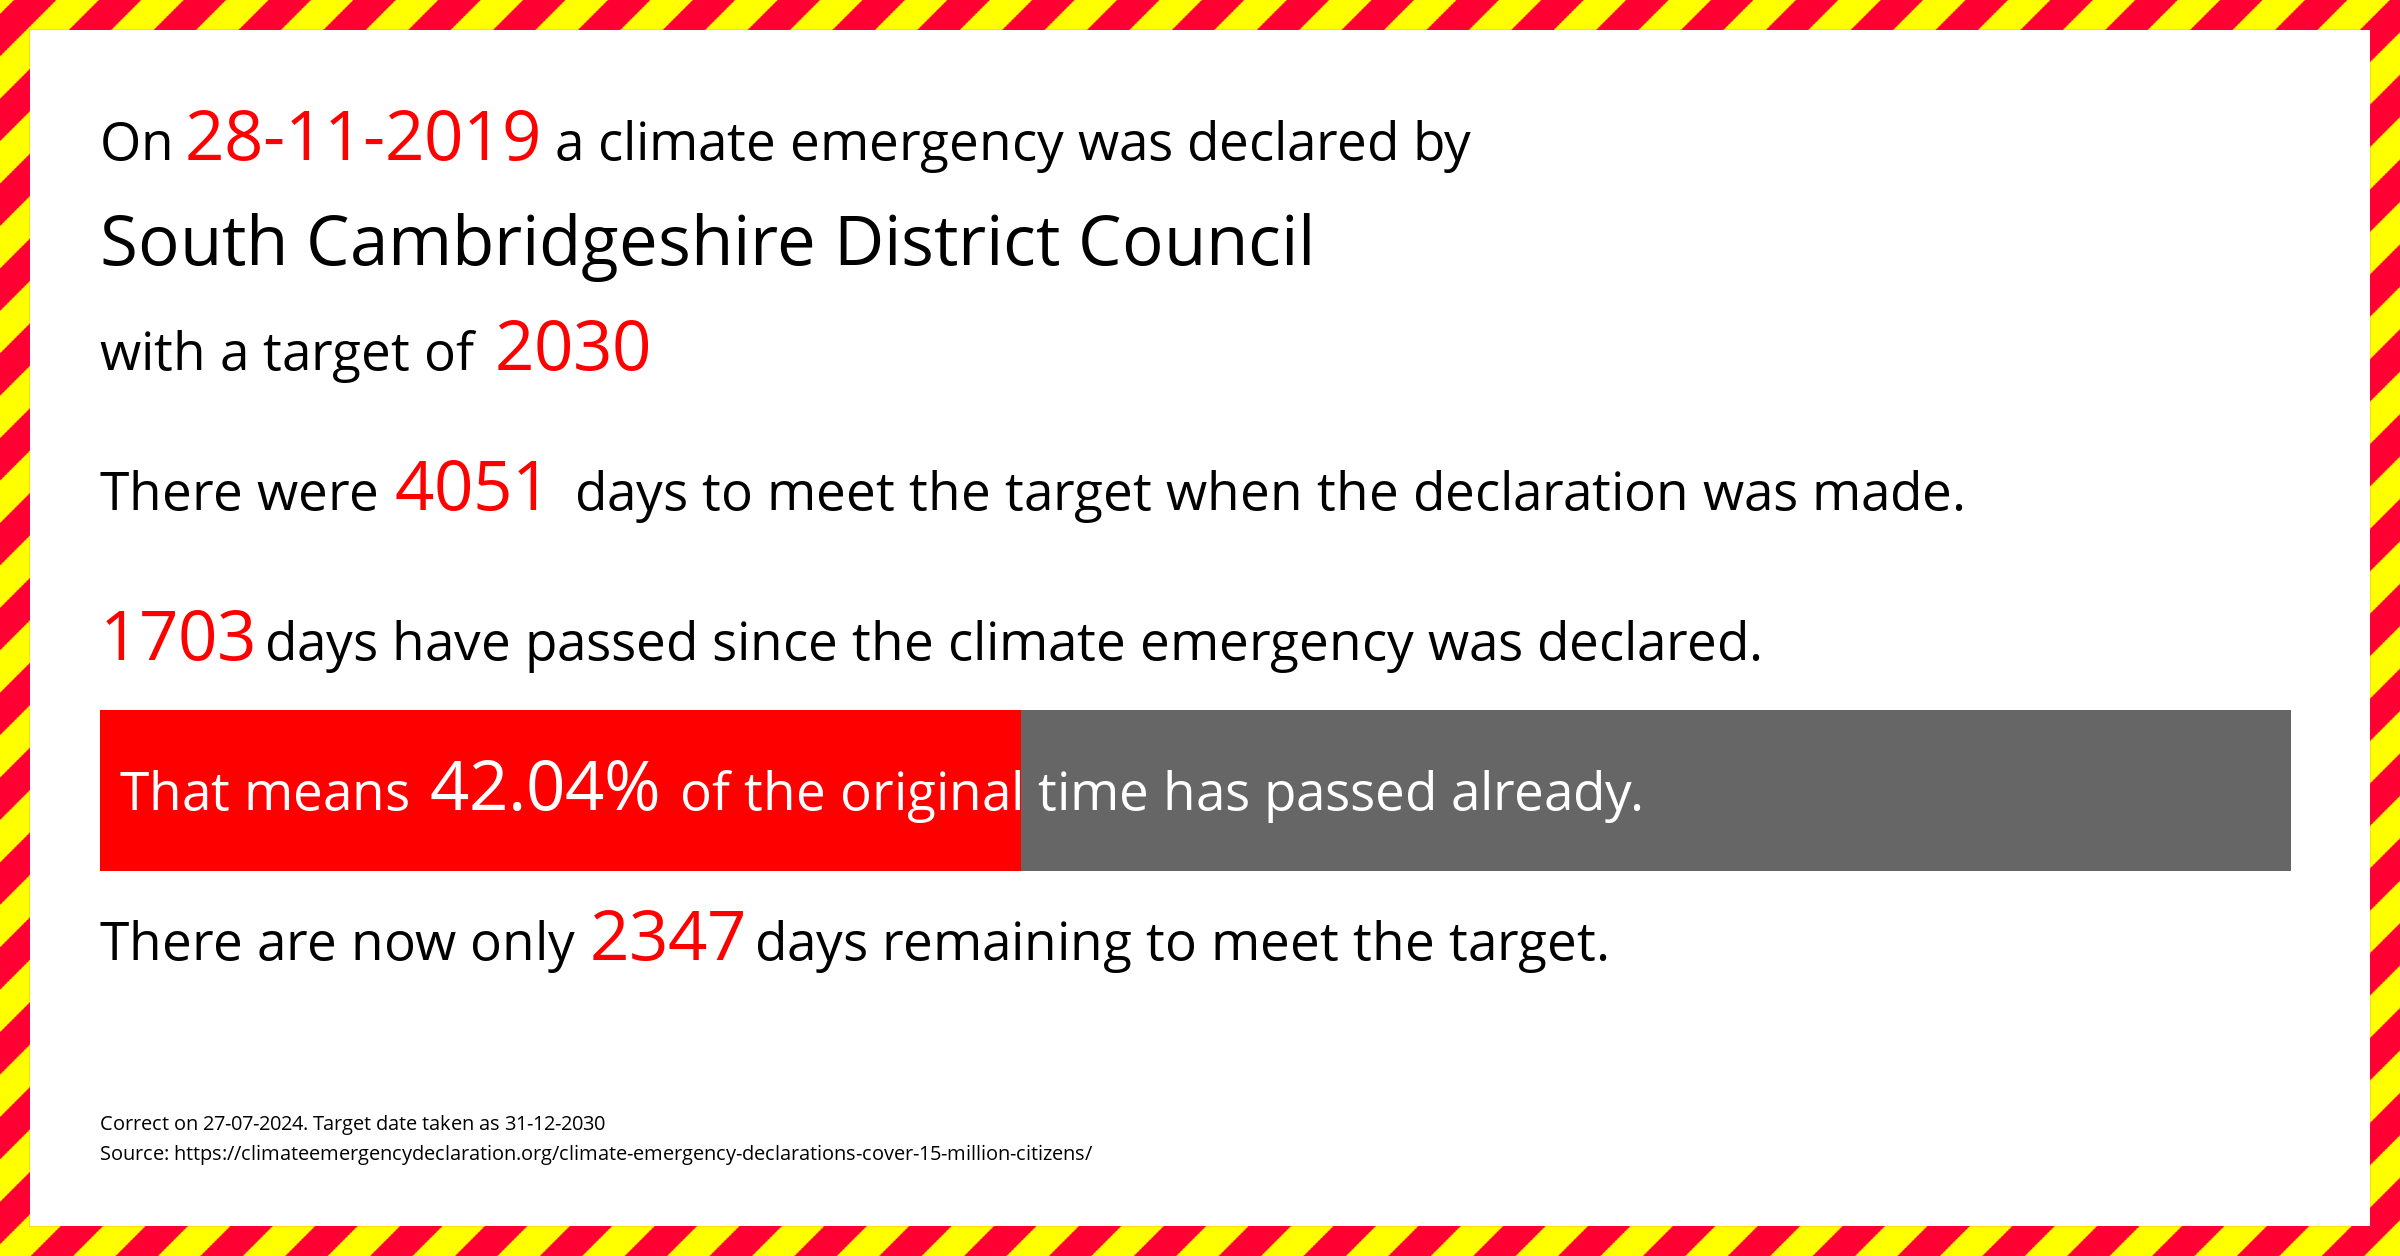 South Cambridgeshire District Council declared a Climate emergency on Thursday 28th November 2019, with a target of 2030.